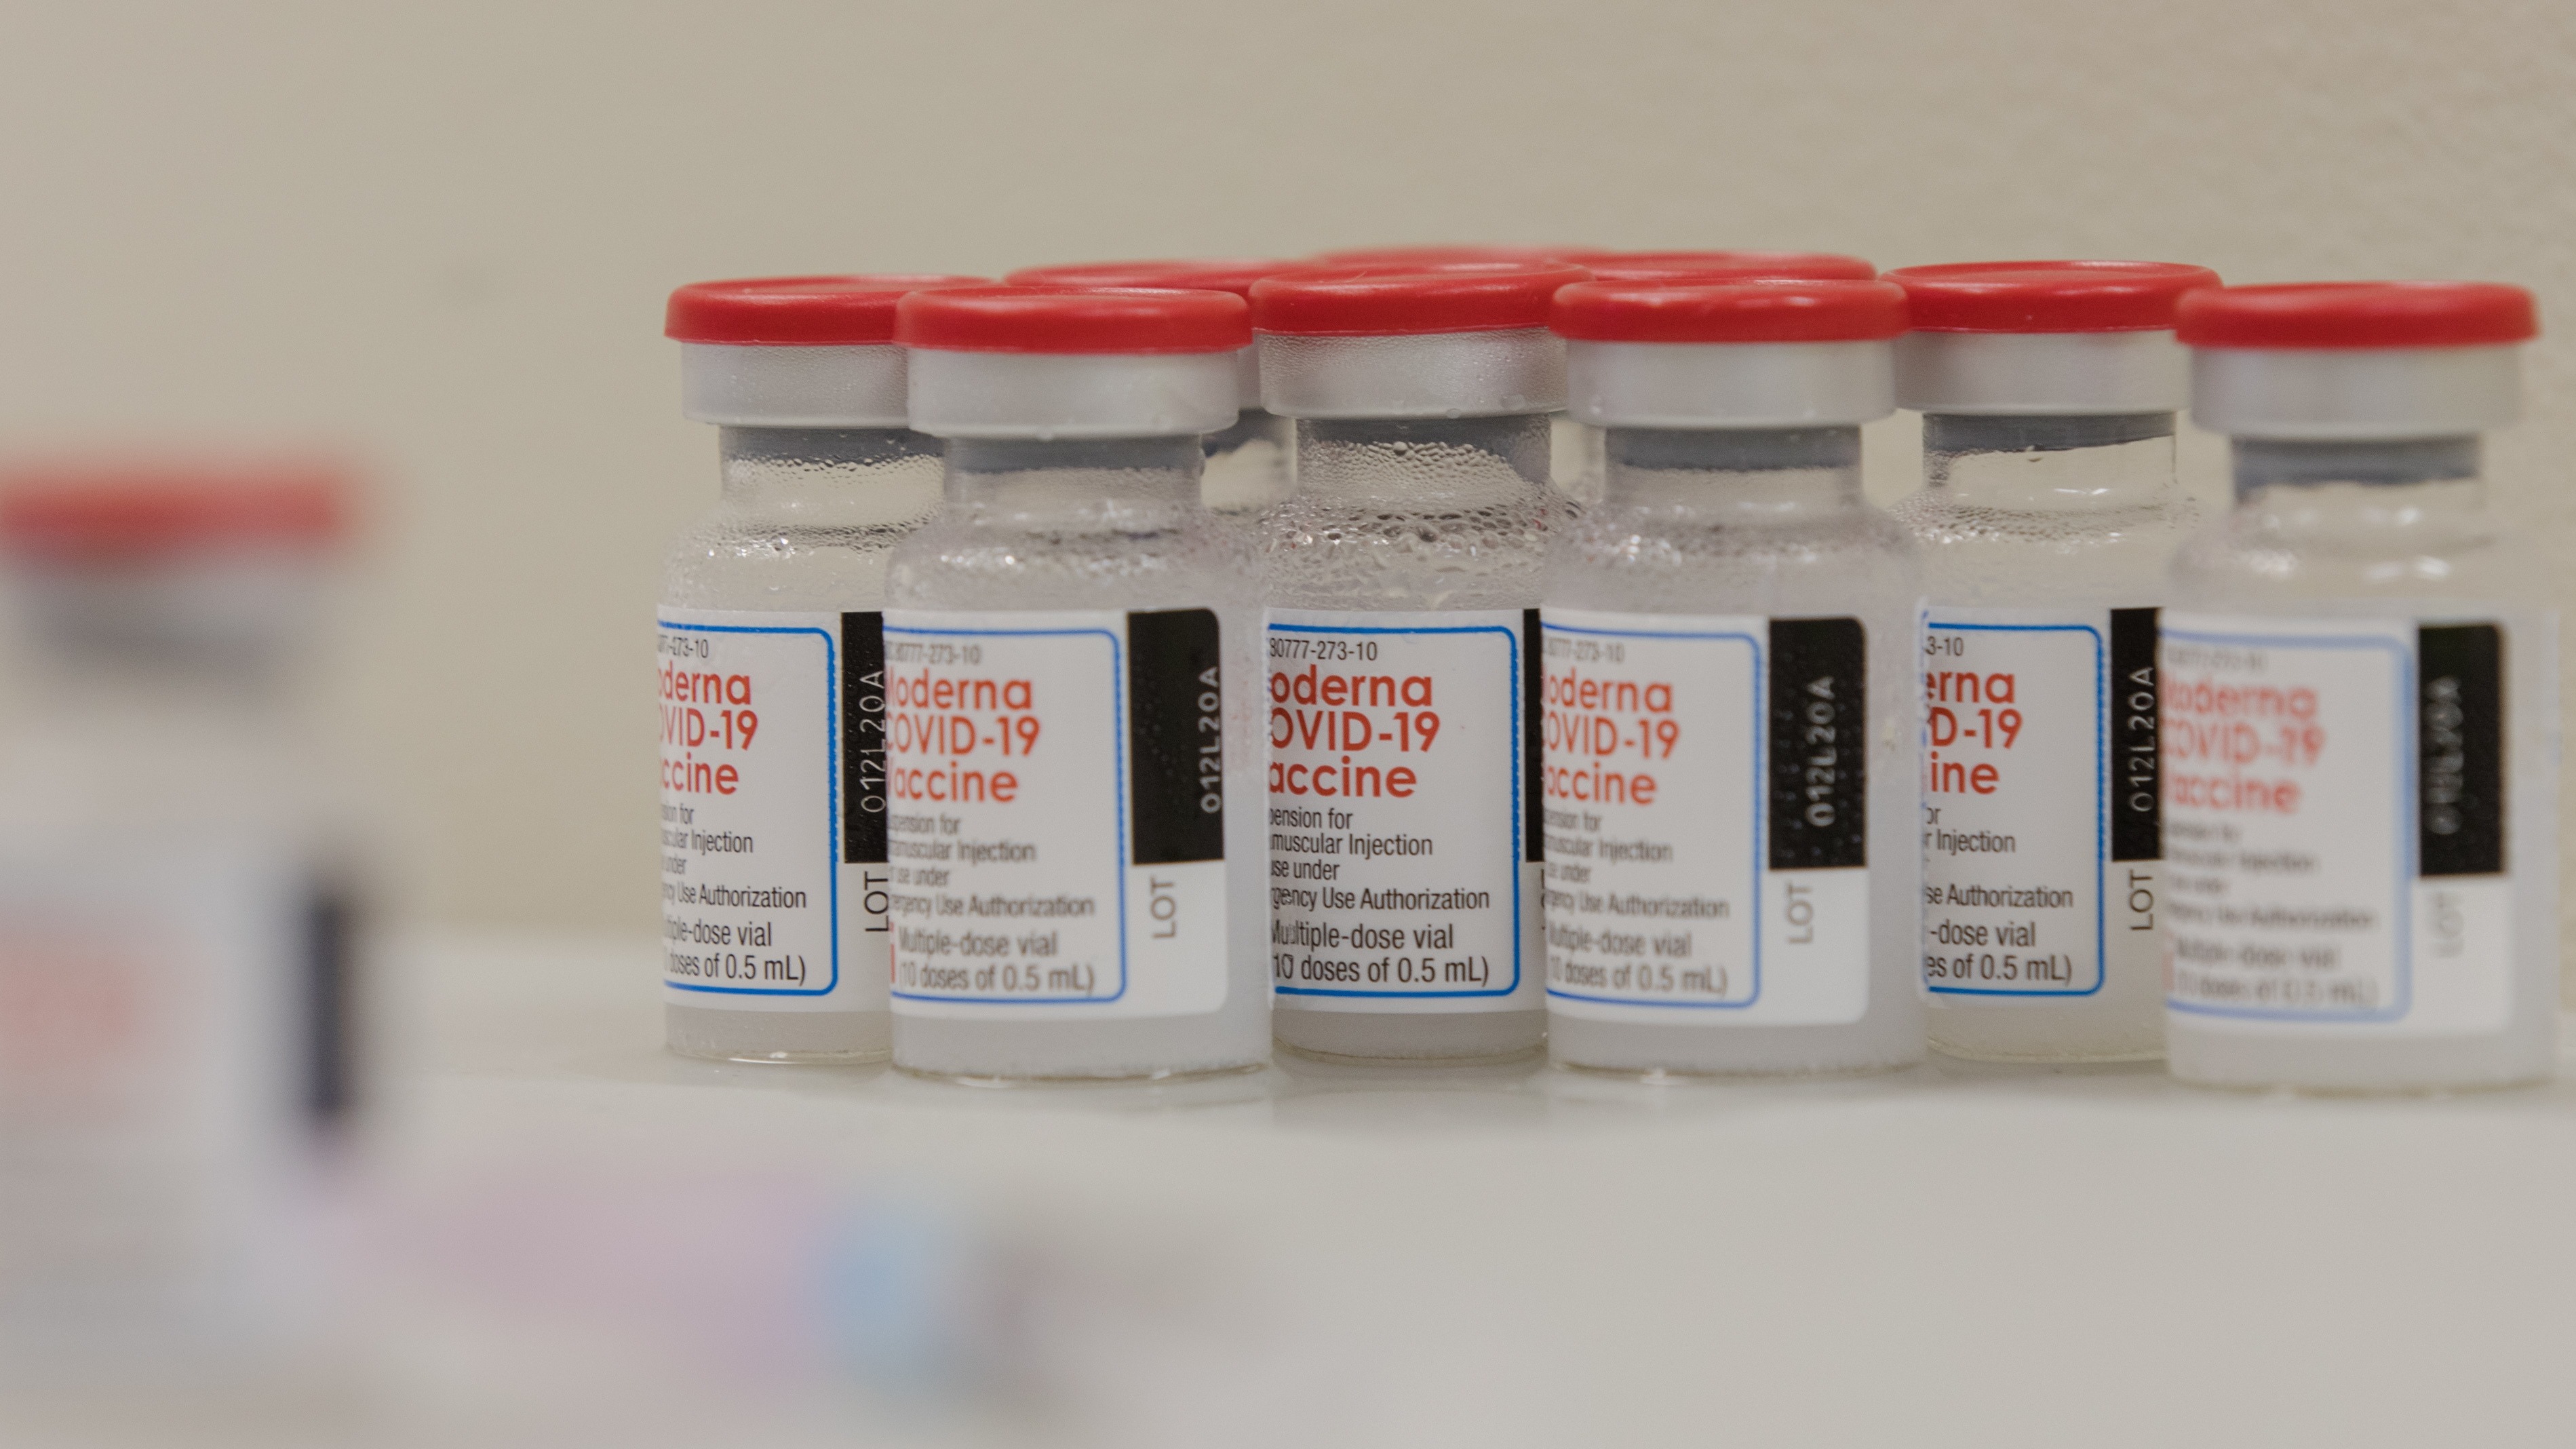 Vials of the Moderna COVID-19 vaccines are seen this week at the Covenant Place facility in Sumter, S.C. CREDIT: Micah Green/Bloomberg via Getty Images